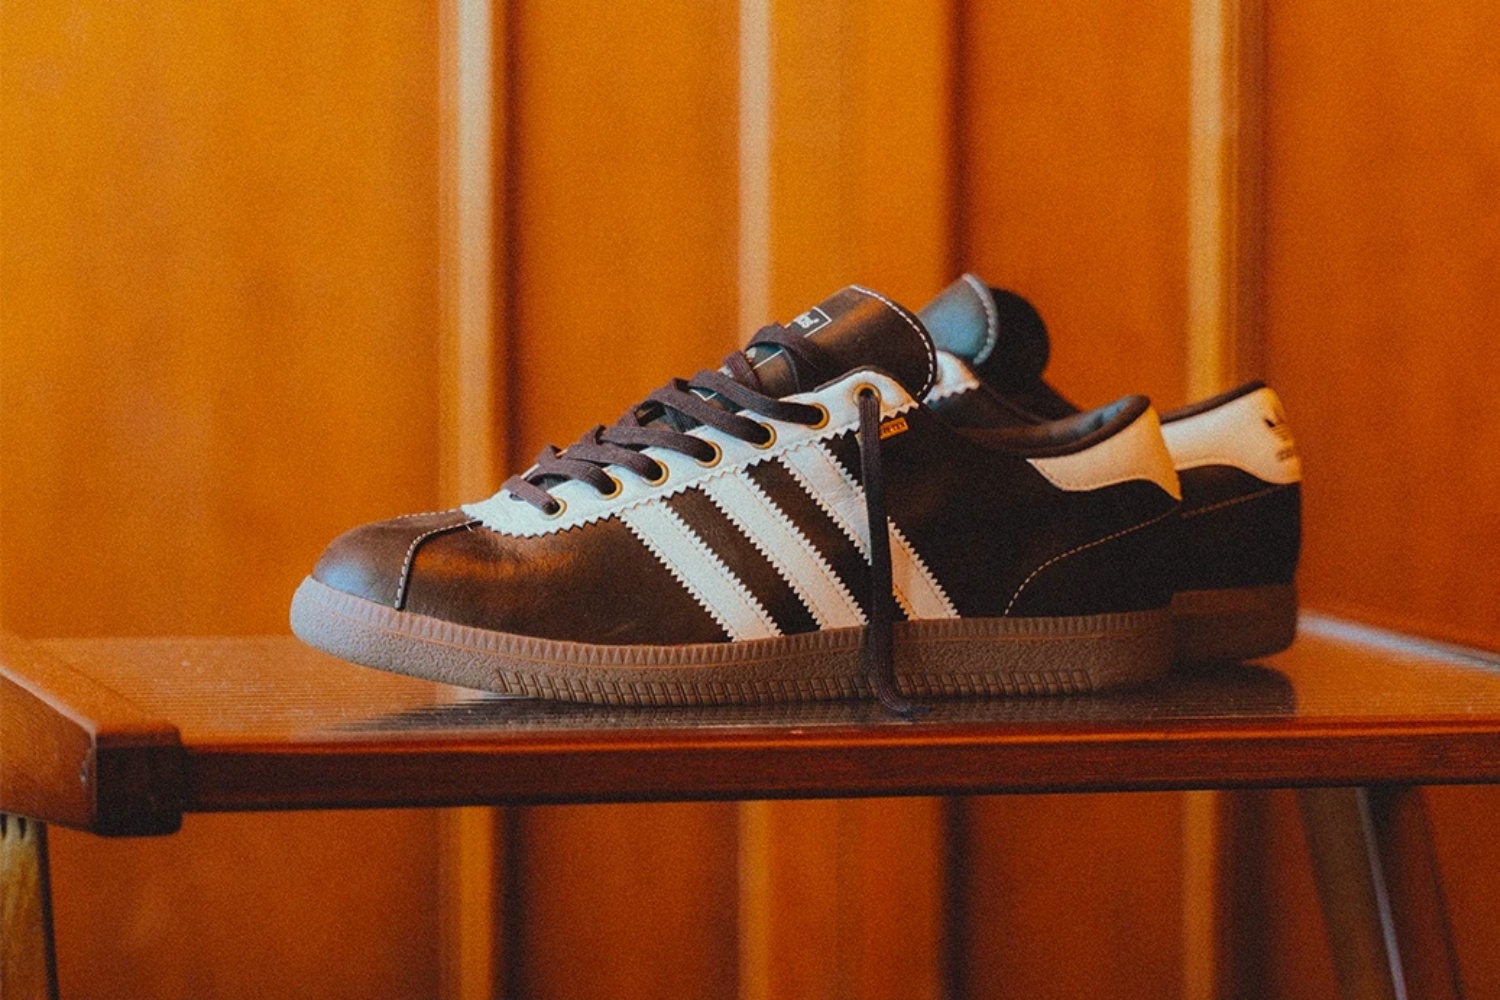 adidas unveils the Bern Gore-Tex for the 'Miracle of Bern' anniversary